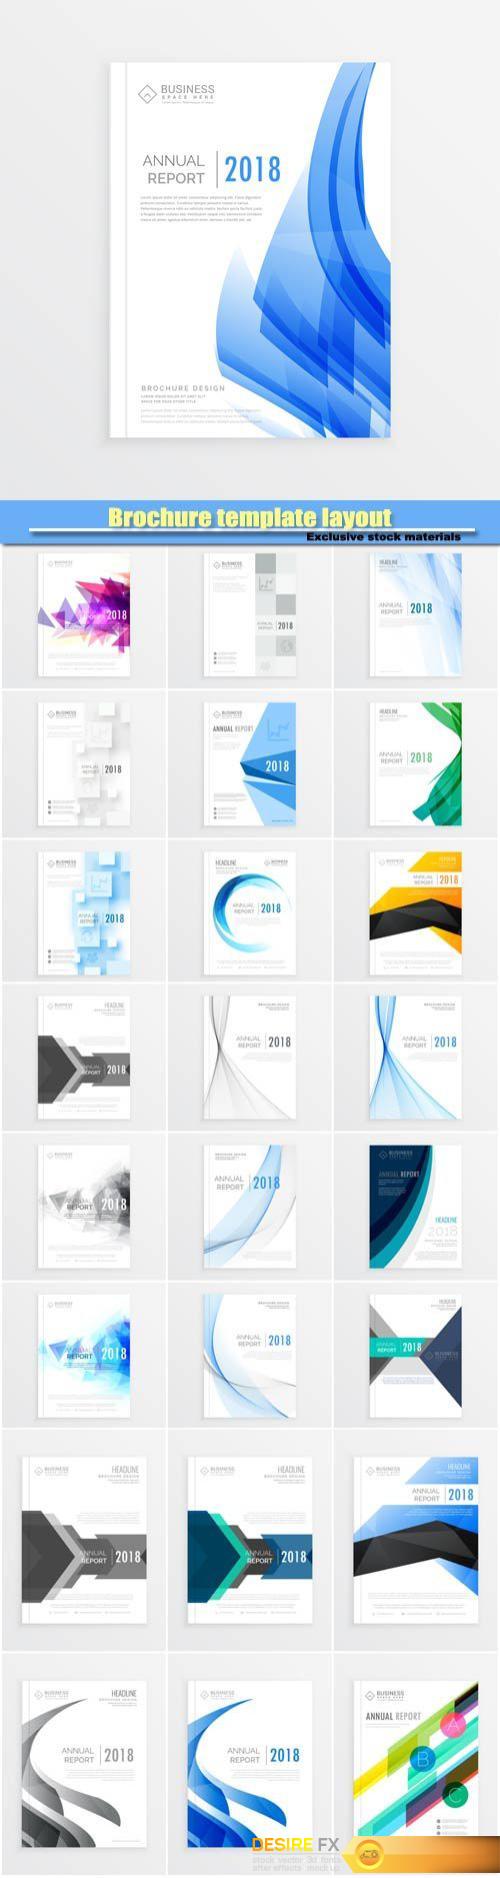 Brochure template layout, annual report cover design, magazine flyer design